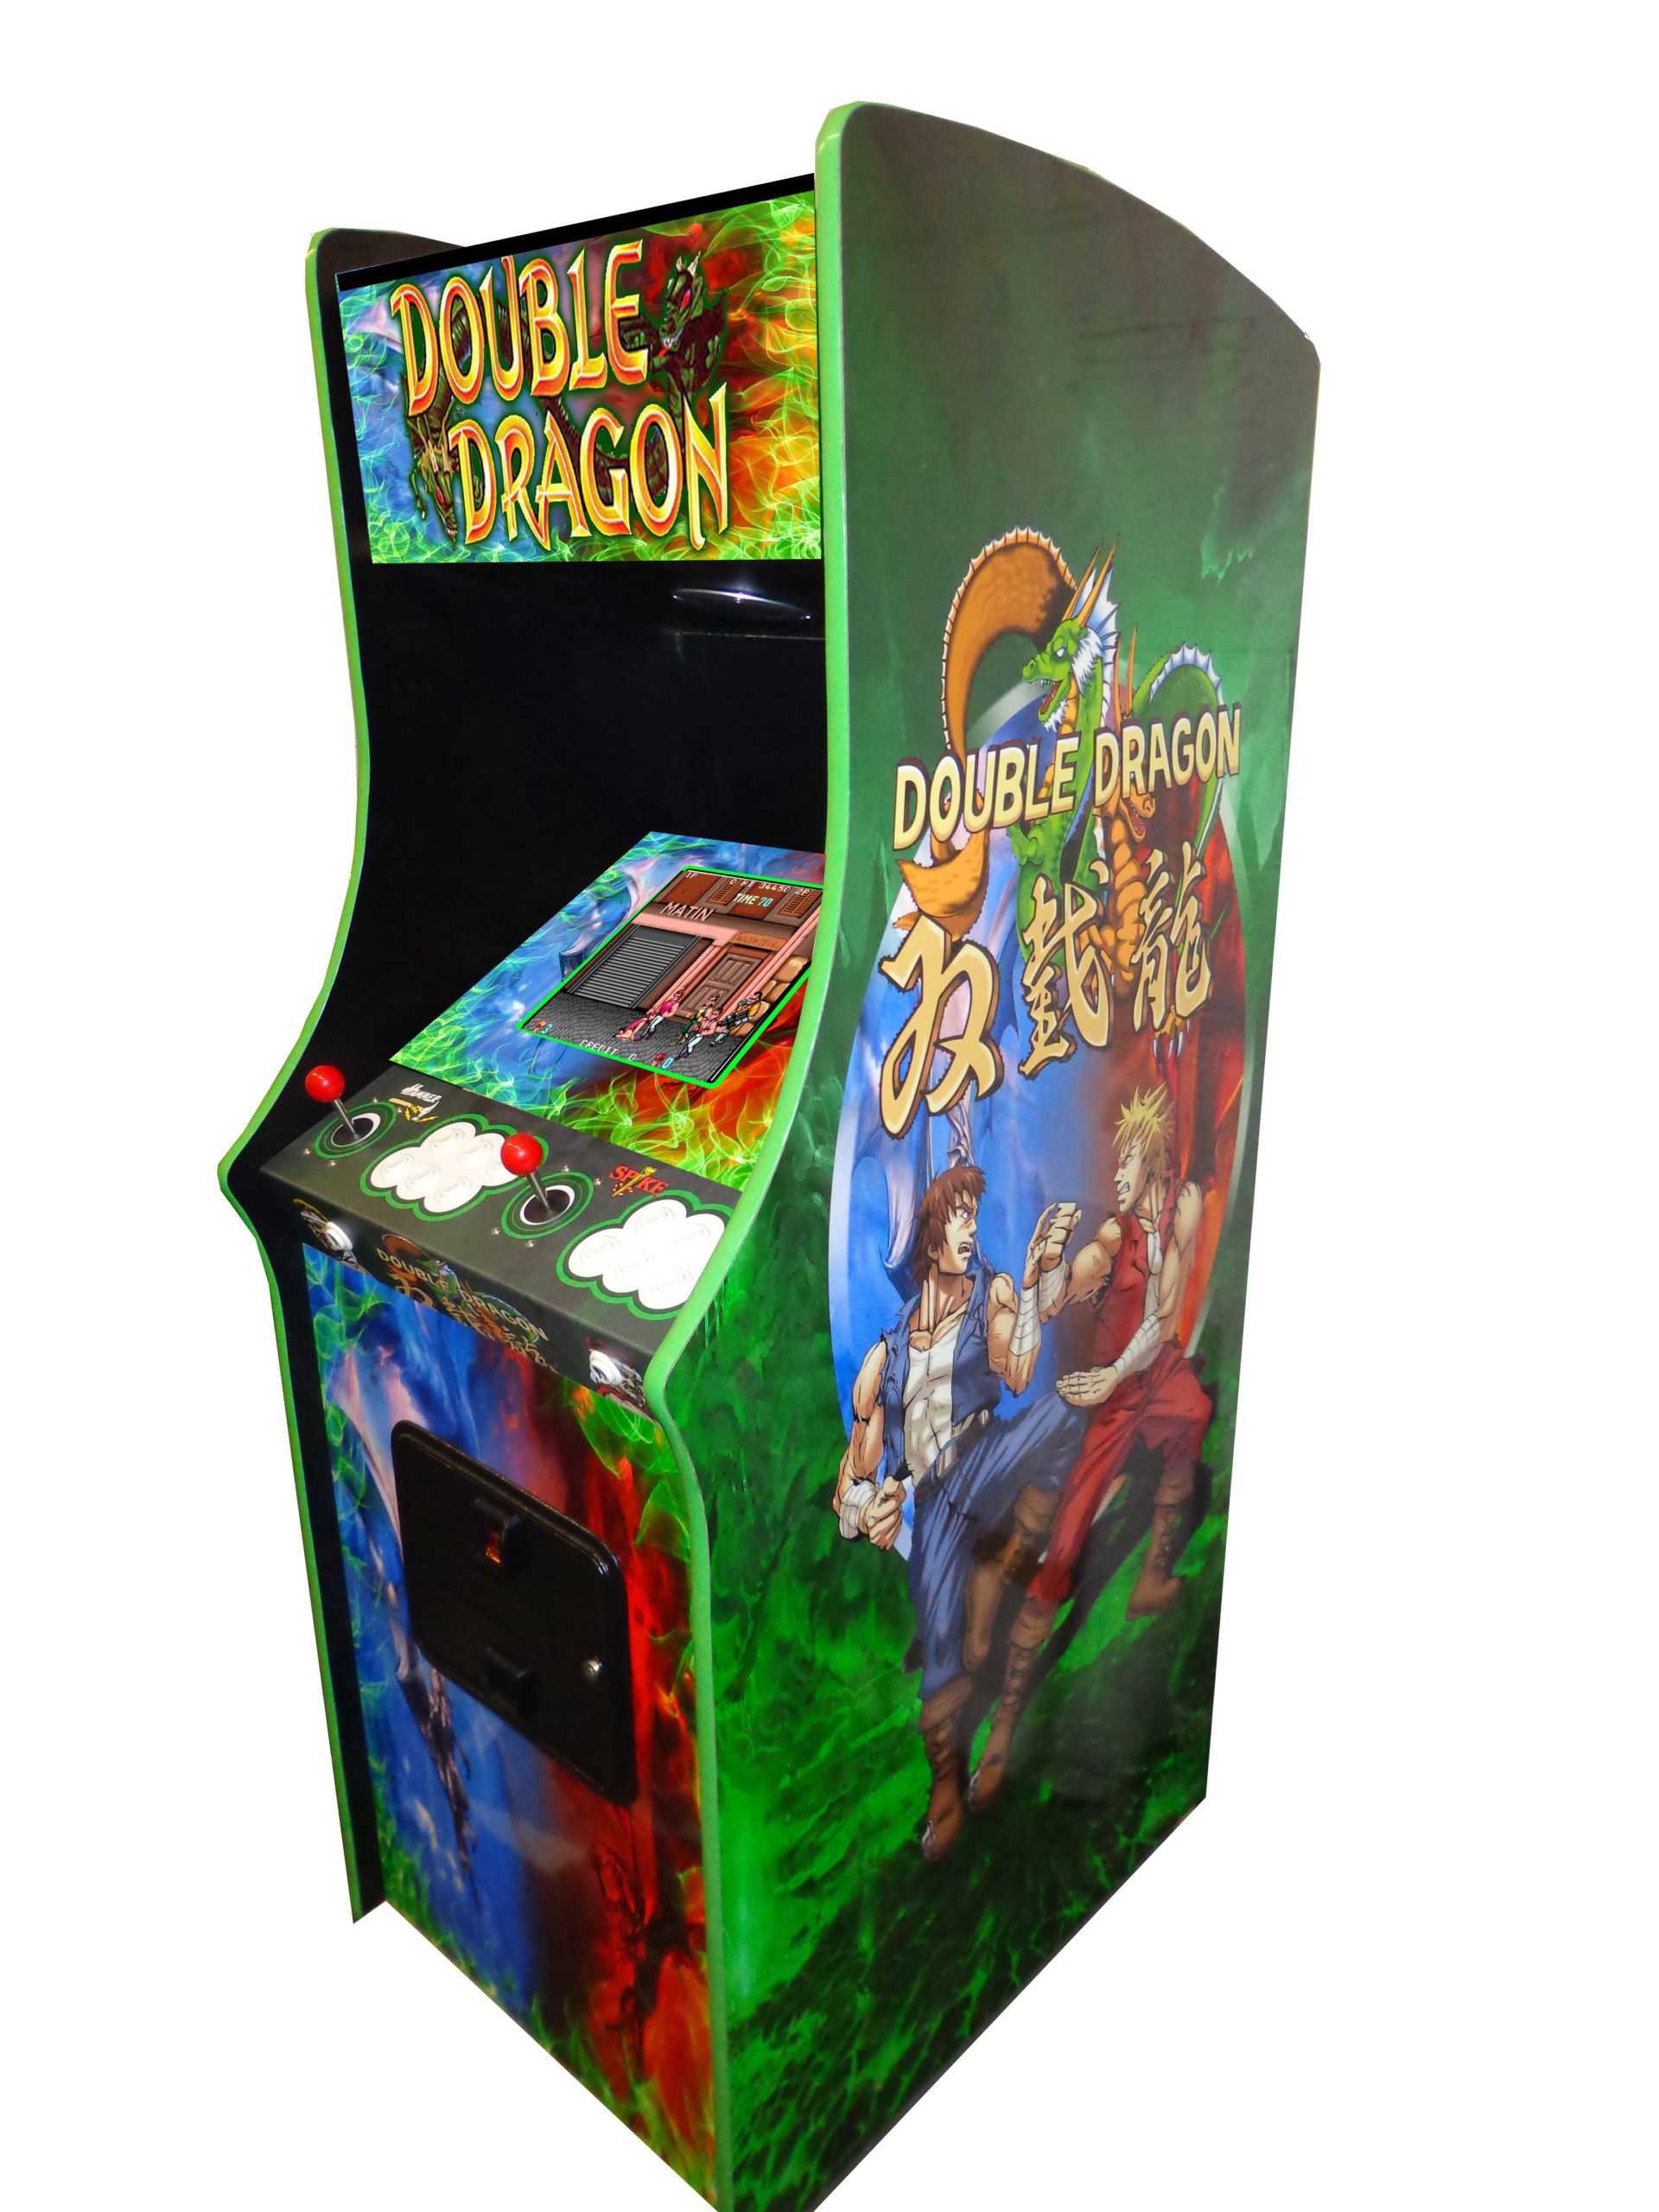 double dragon mame themed cabinet